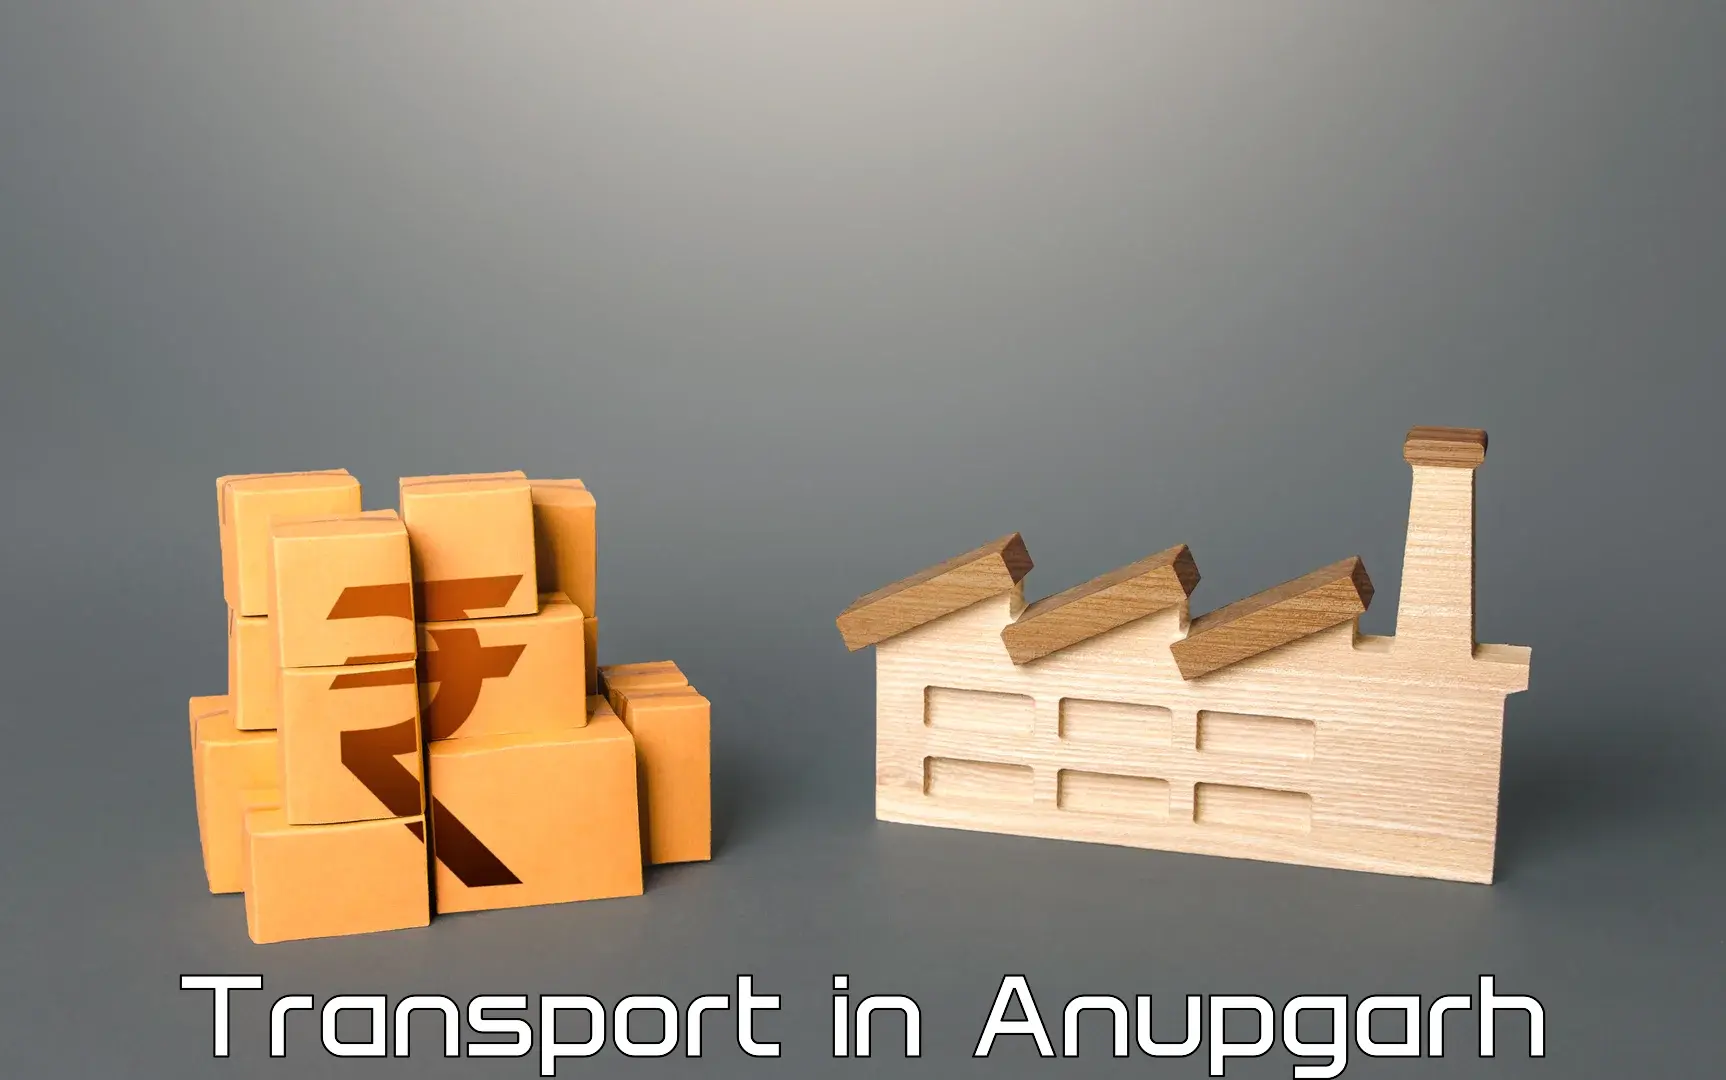 Air freight transport services in Anupgarh